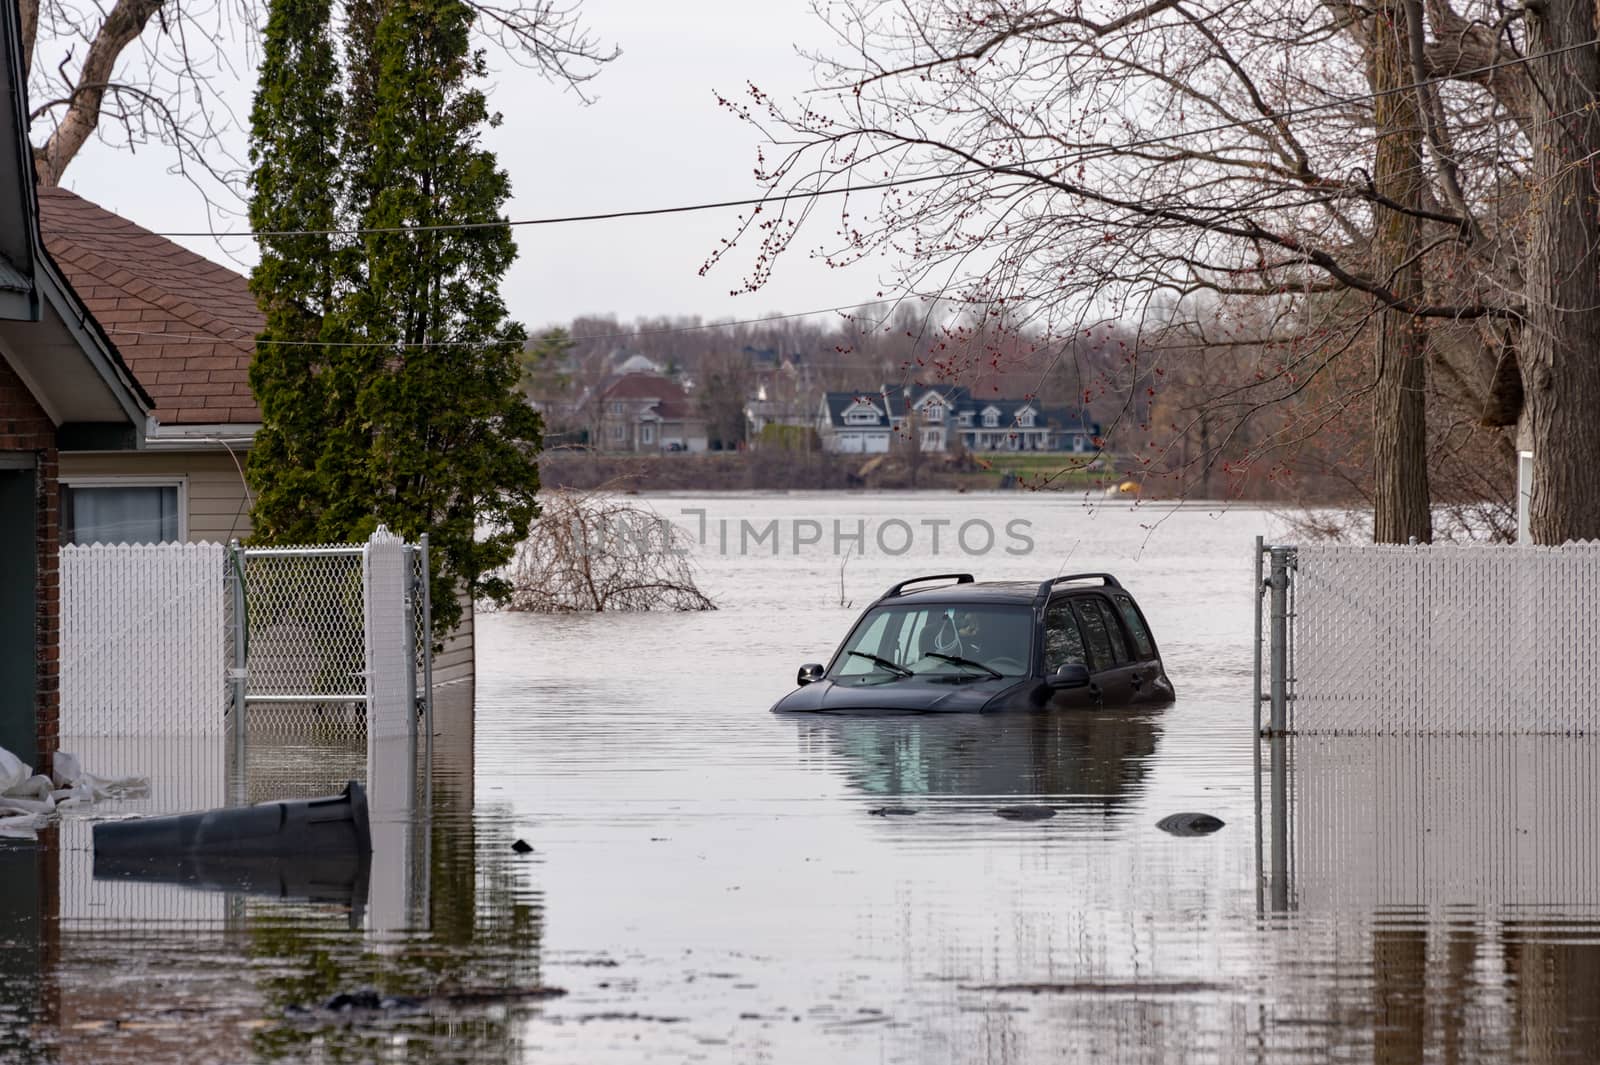 Flooding in Quebec (Spring 2019) by mbruxelle